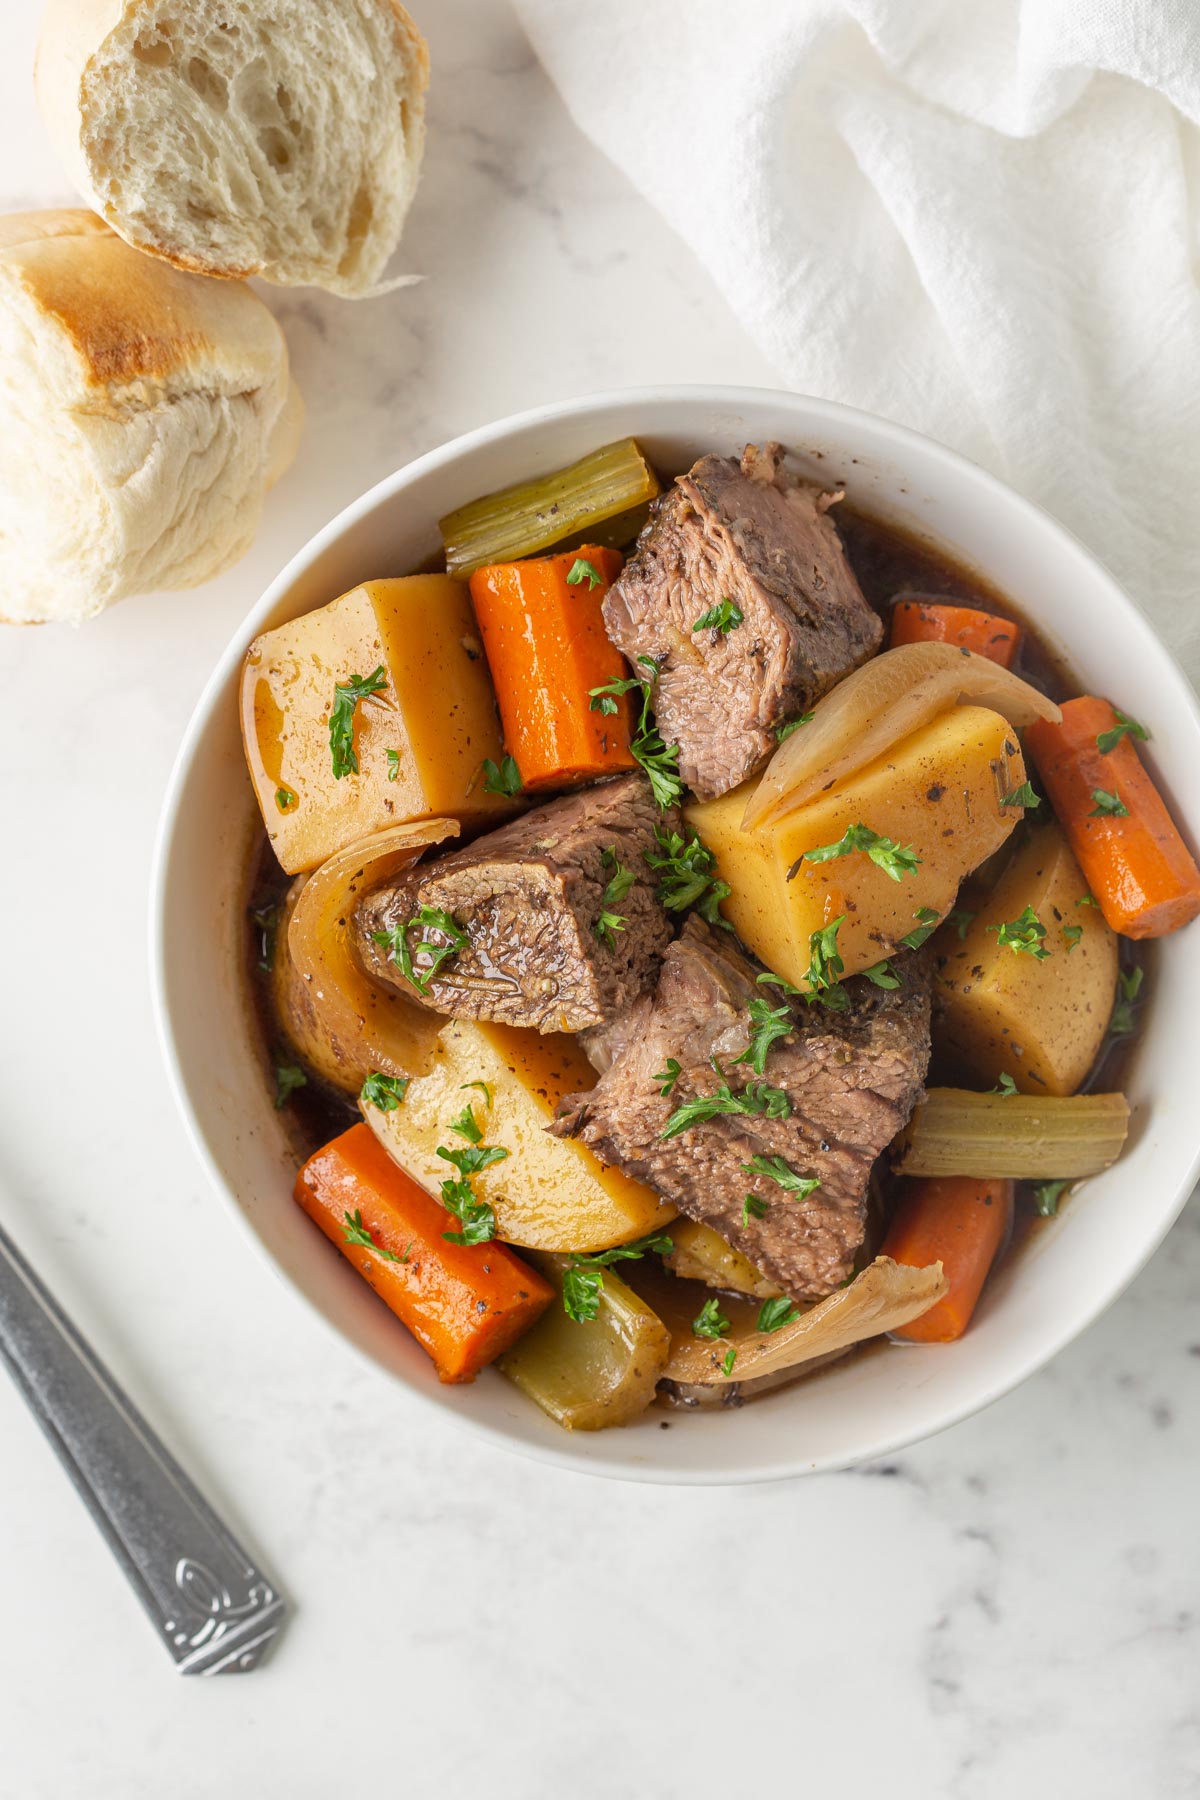 Overhead view of a white bowl of pot roast and vegetables by a bread roll.